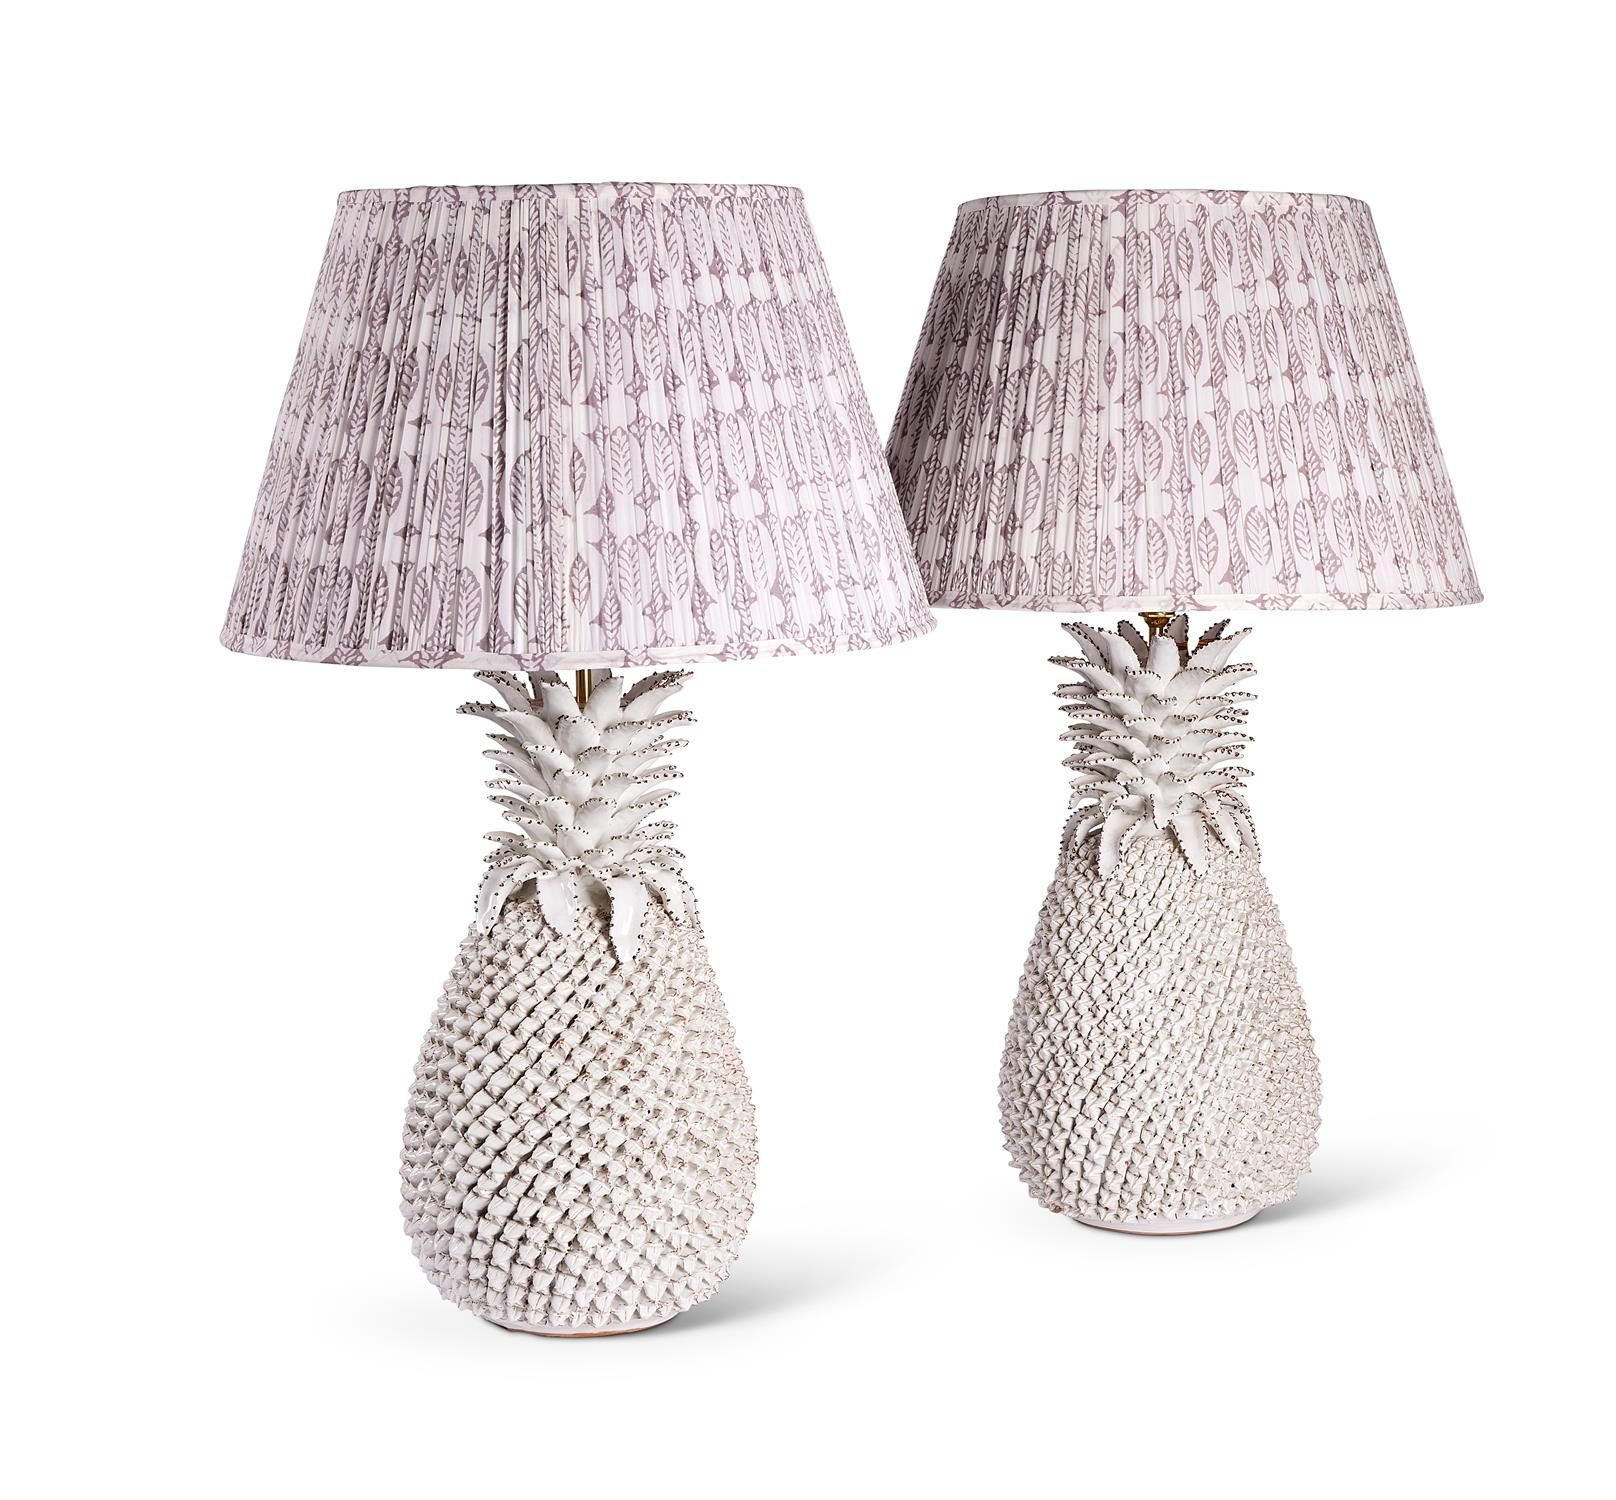 A PAIR OF WHITE CERAMIC PINEAPPLE LAMP BASES, MODERN PAIRE DE LAMPES PINEAPPLE E&hellip;